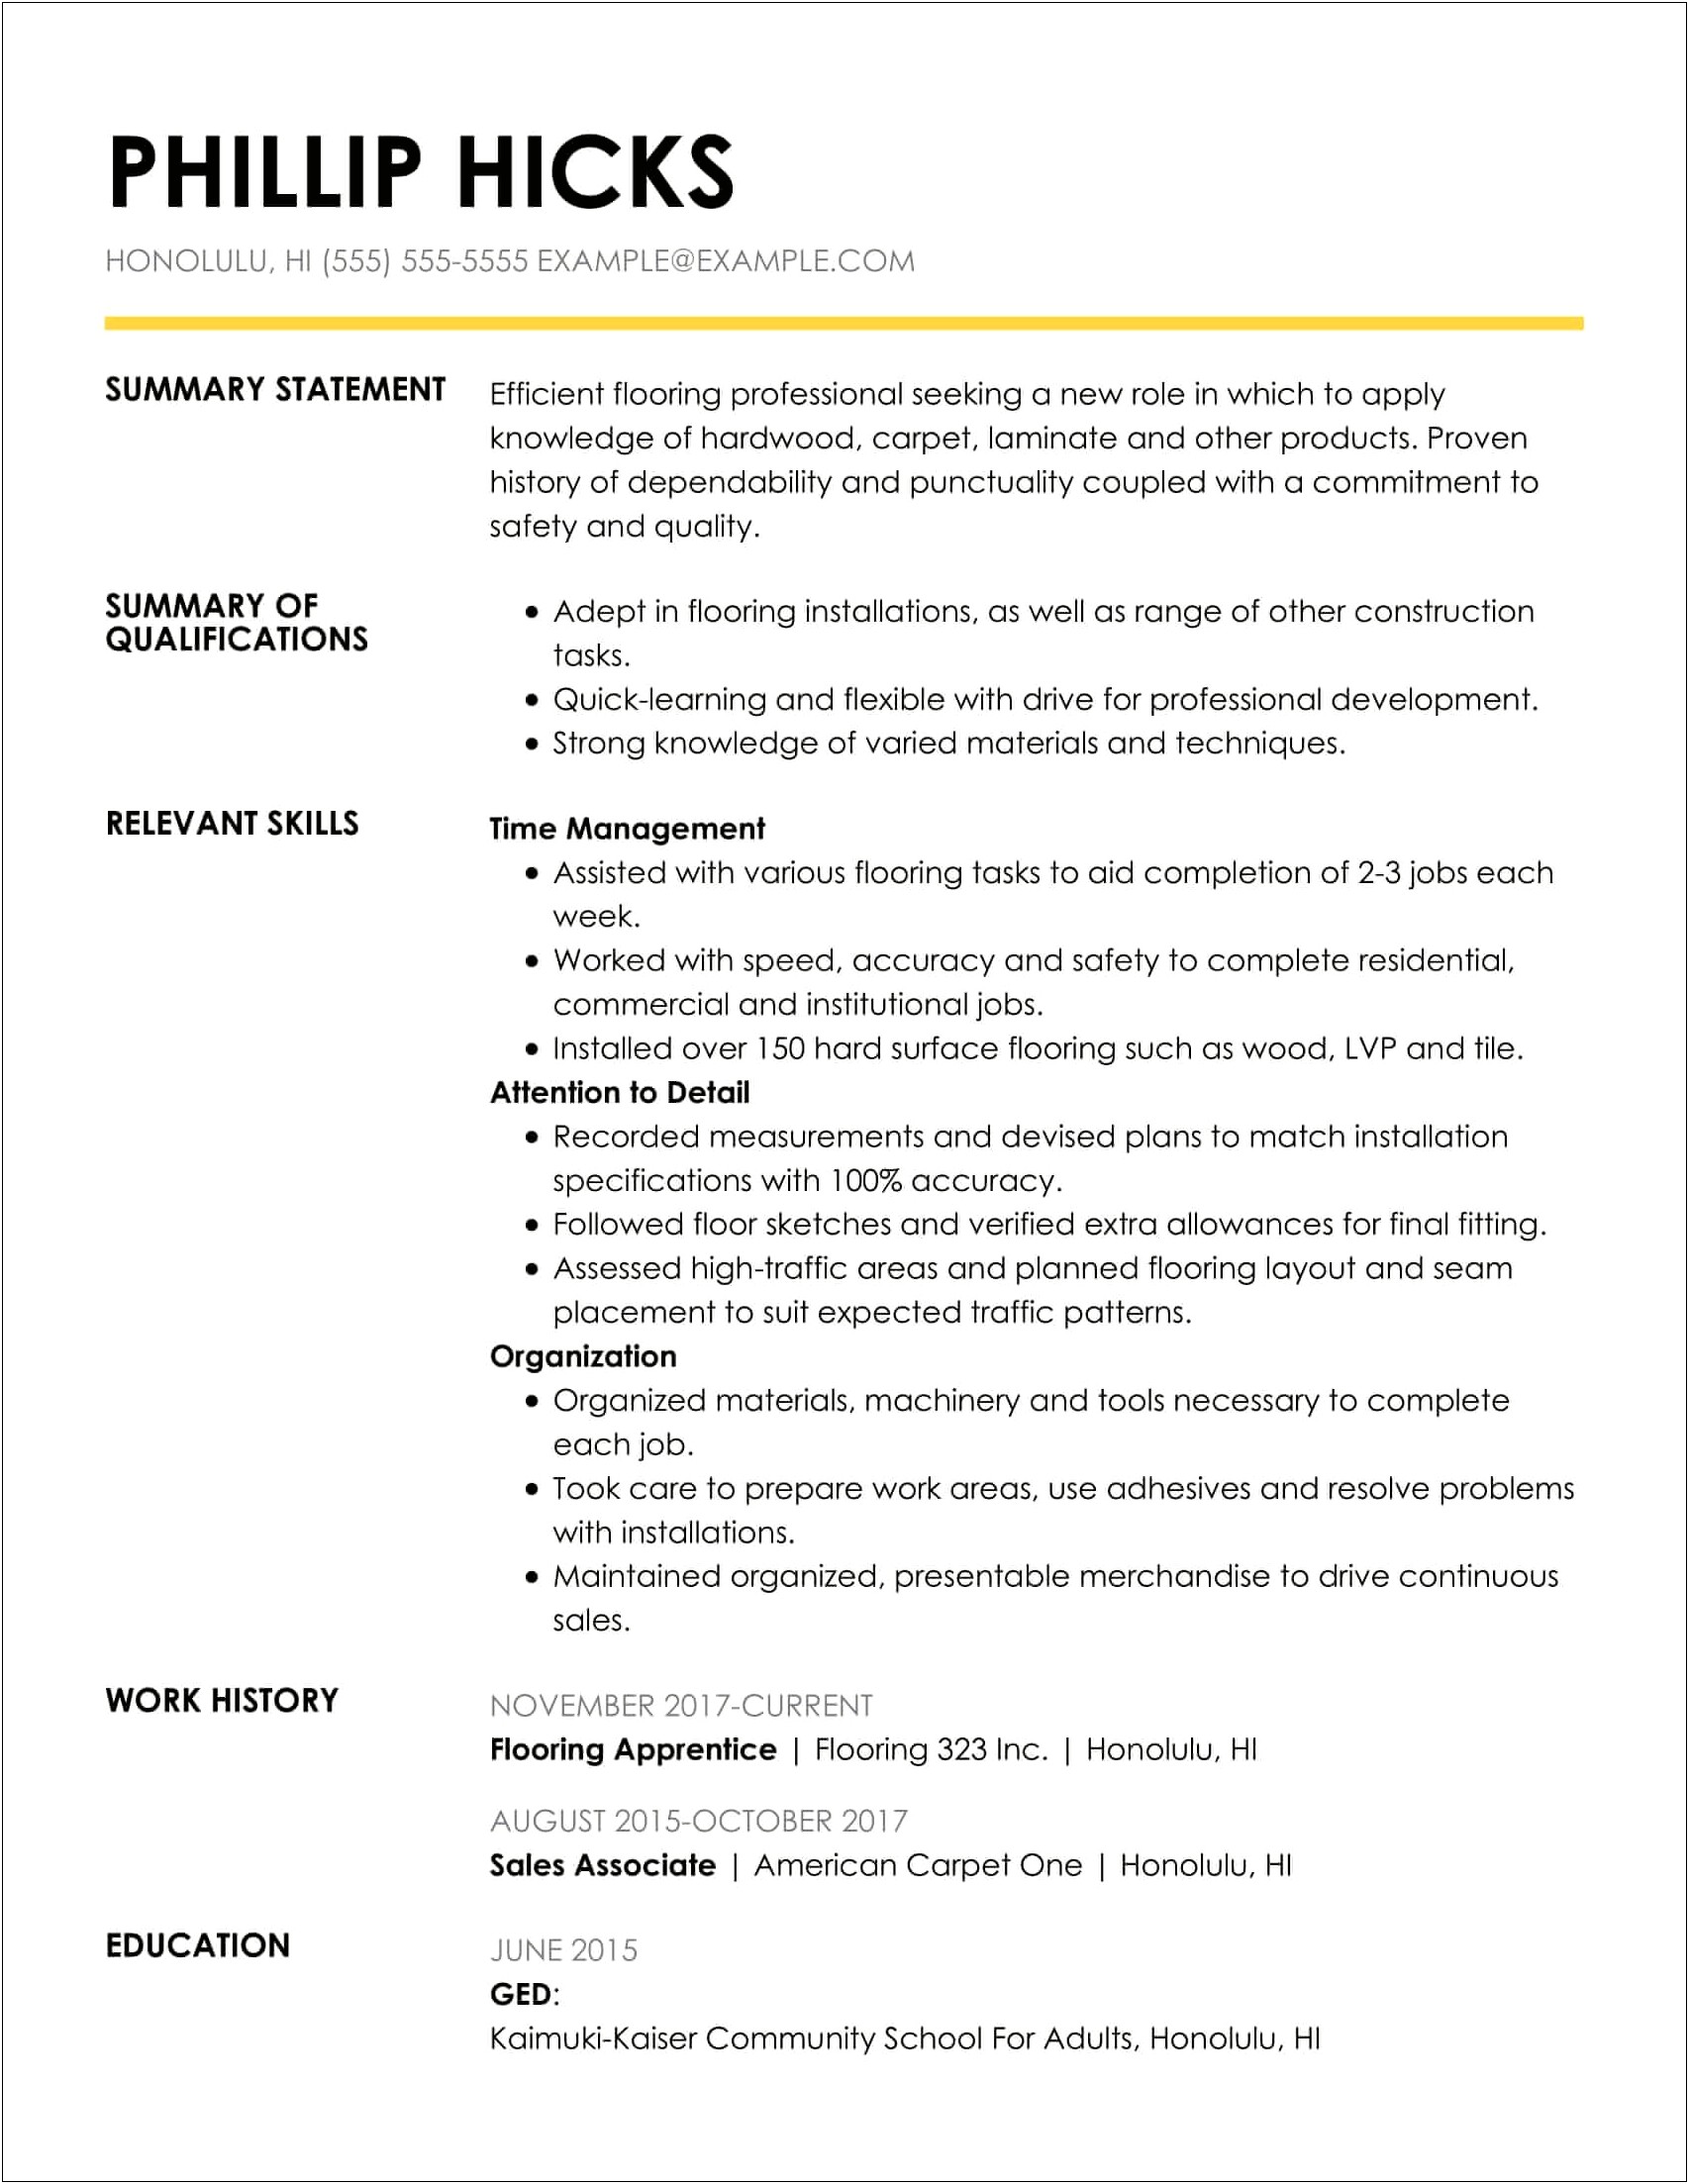 Summary For The Qualification In Resume